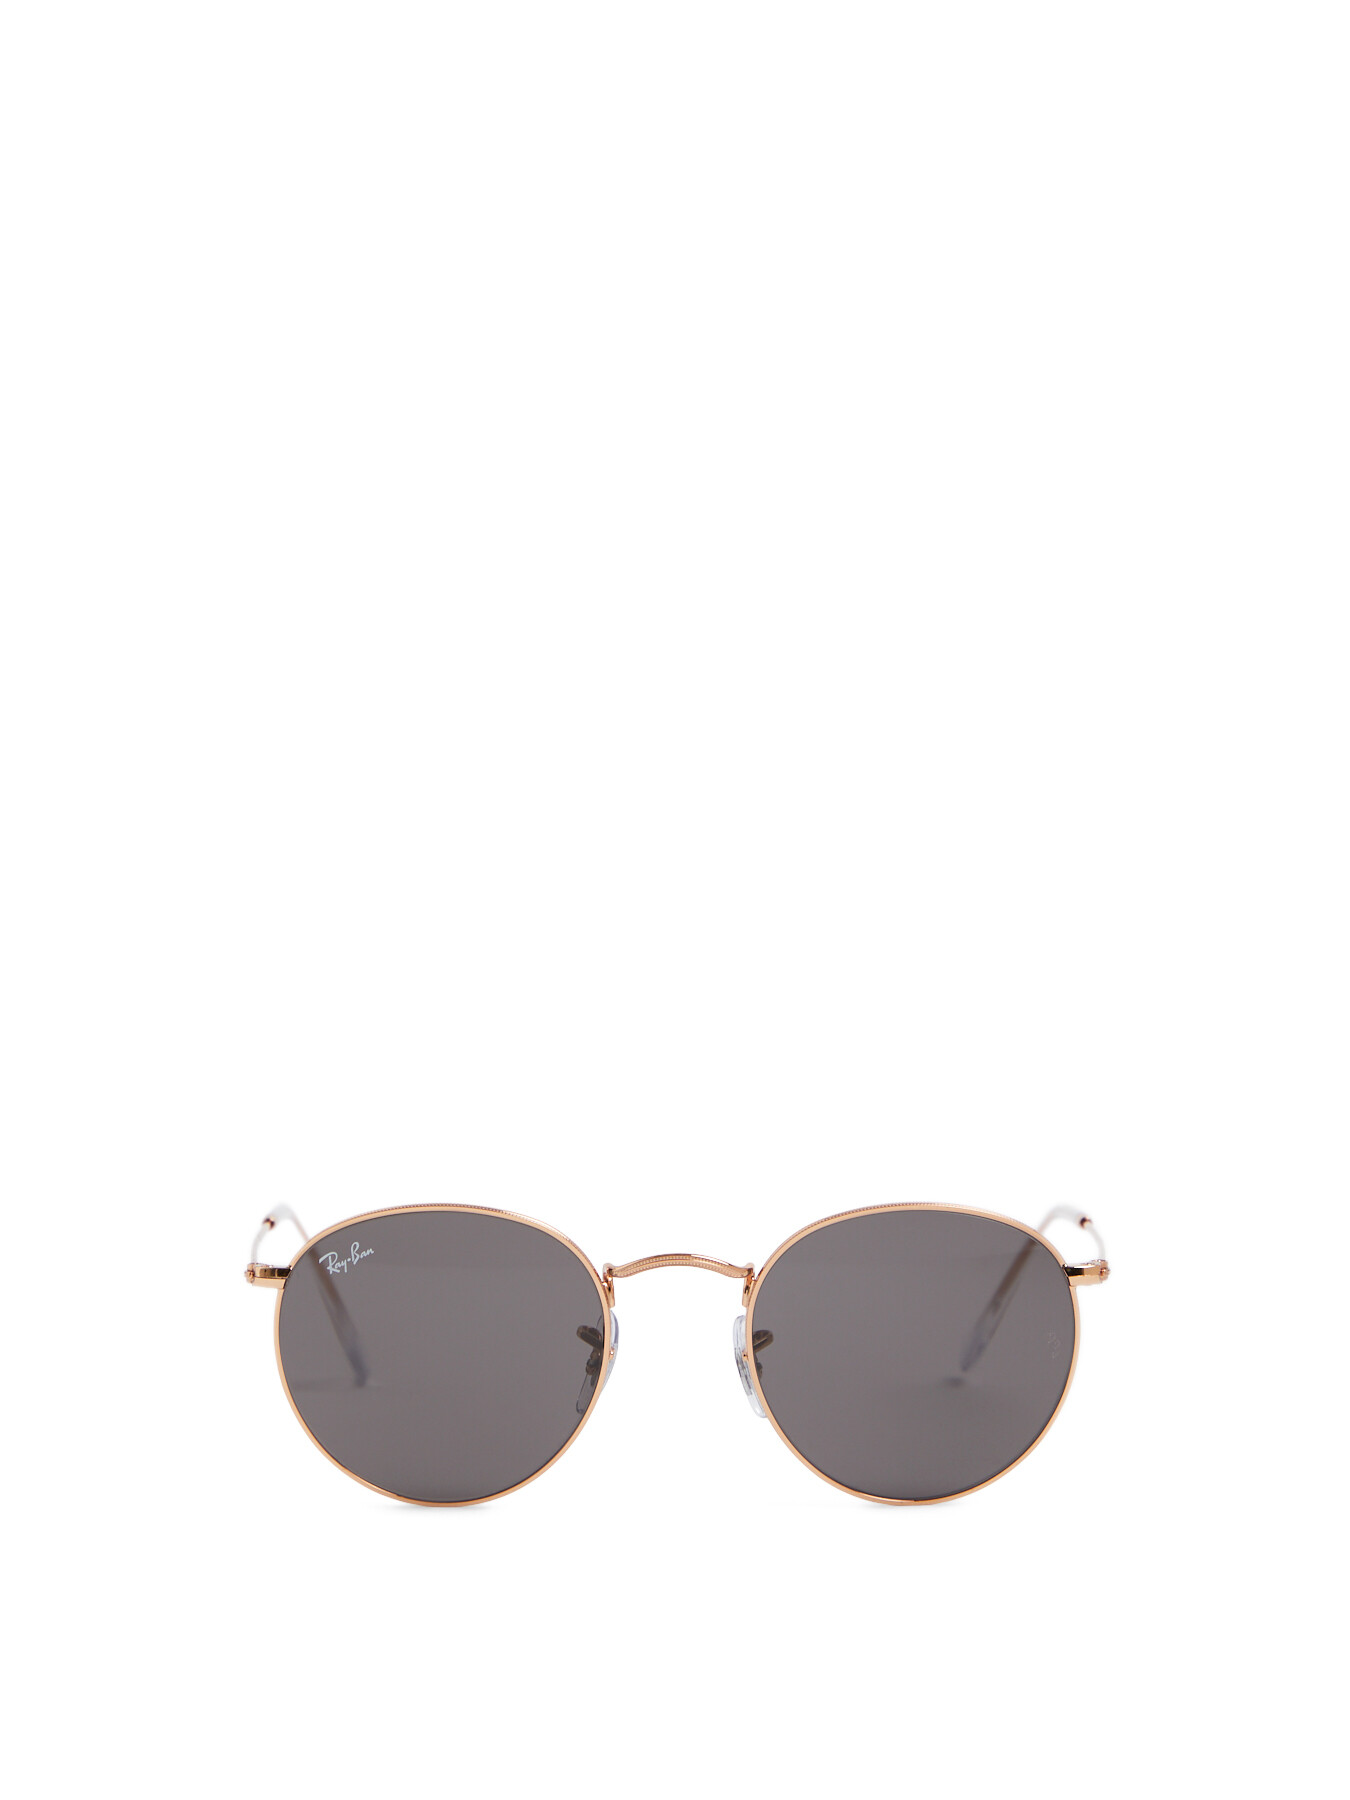 Buy Ray-Ban Round Metal Legend Gold Sunglasses Online.